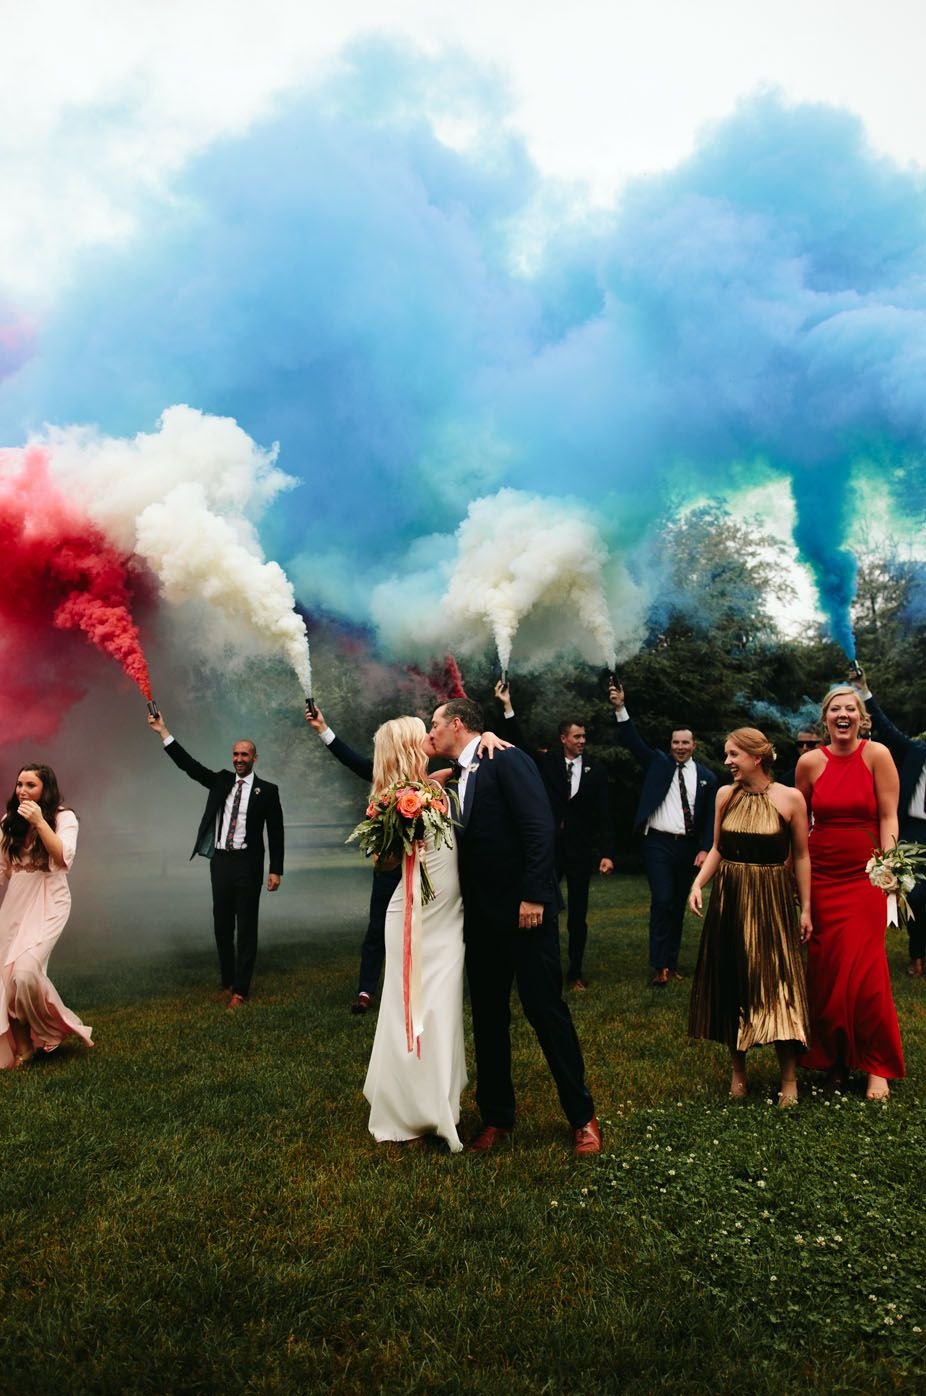 A Festive Fourth of July Wedding with Patriotic Smoke Bombs + Colorful Florals.jpg